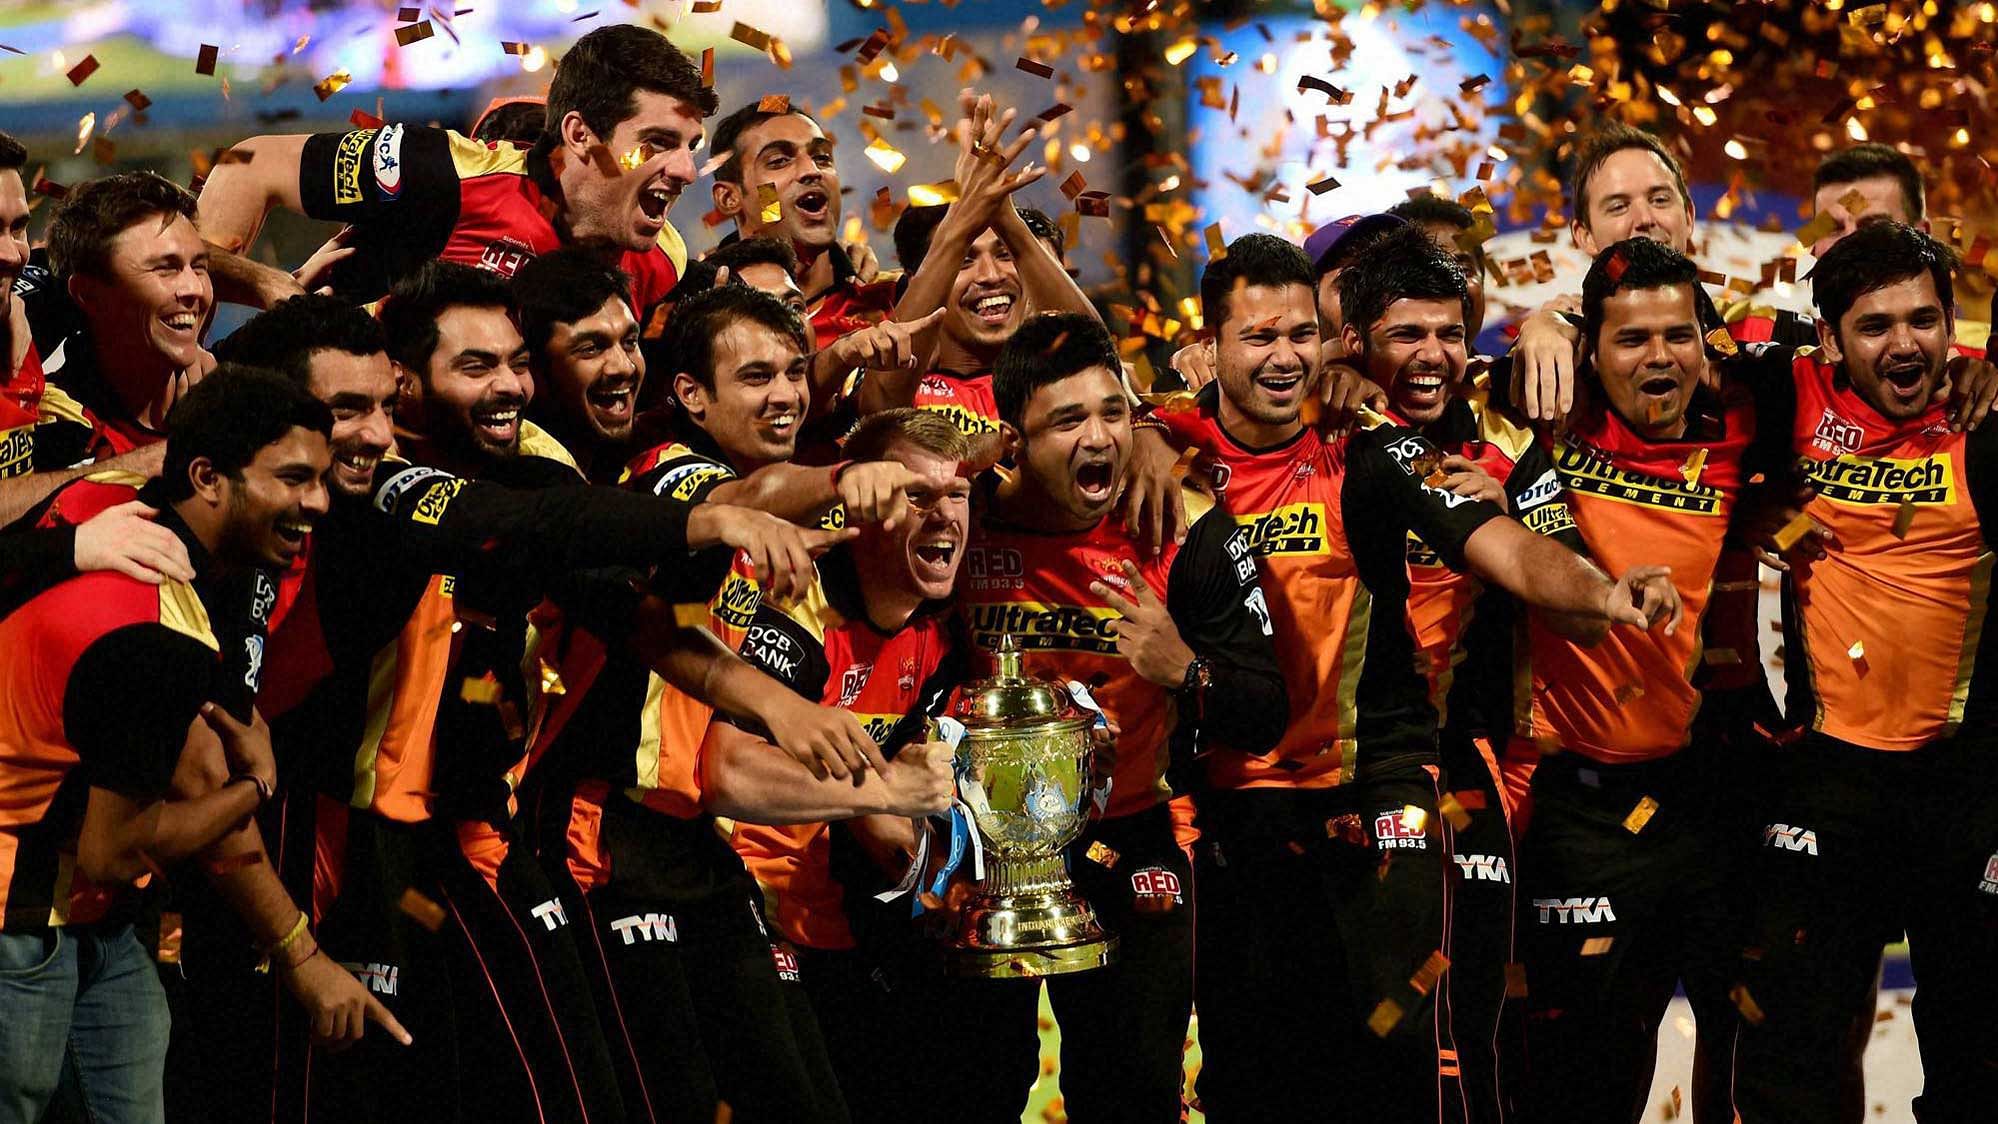 The Sunrisers Hyderabad team celebrate with the IPL trophy. (Photo: IANS)